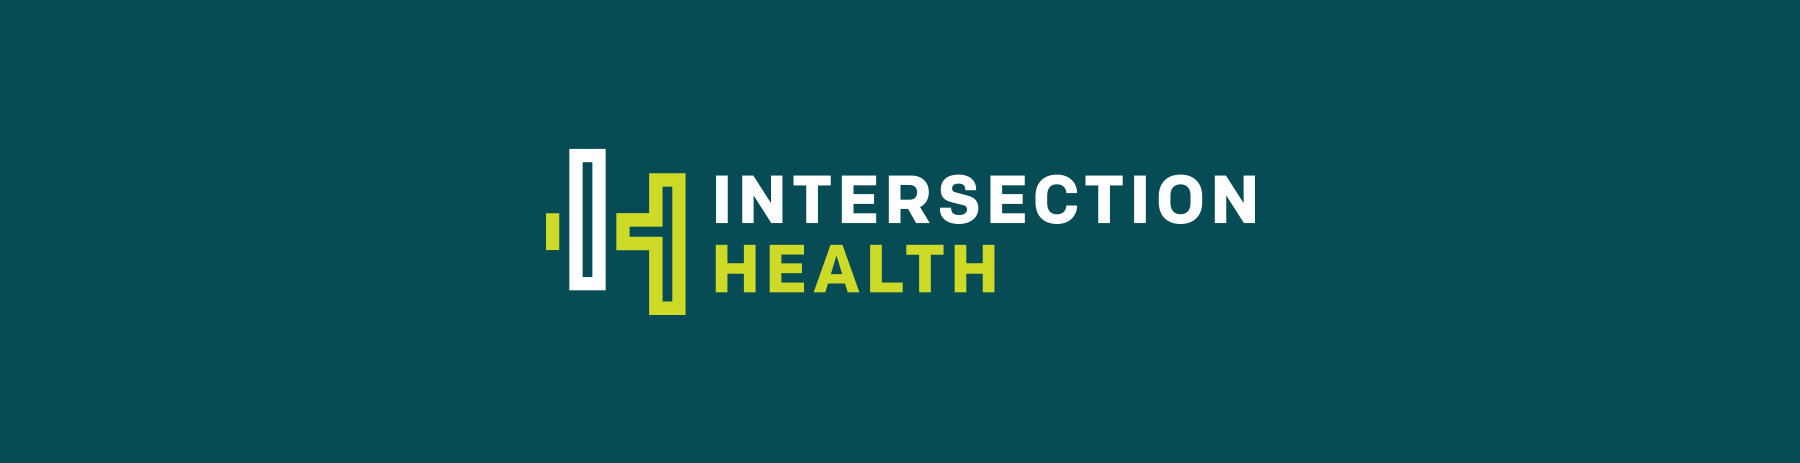 logo-intersectionhealth-cropped-02